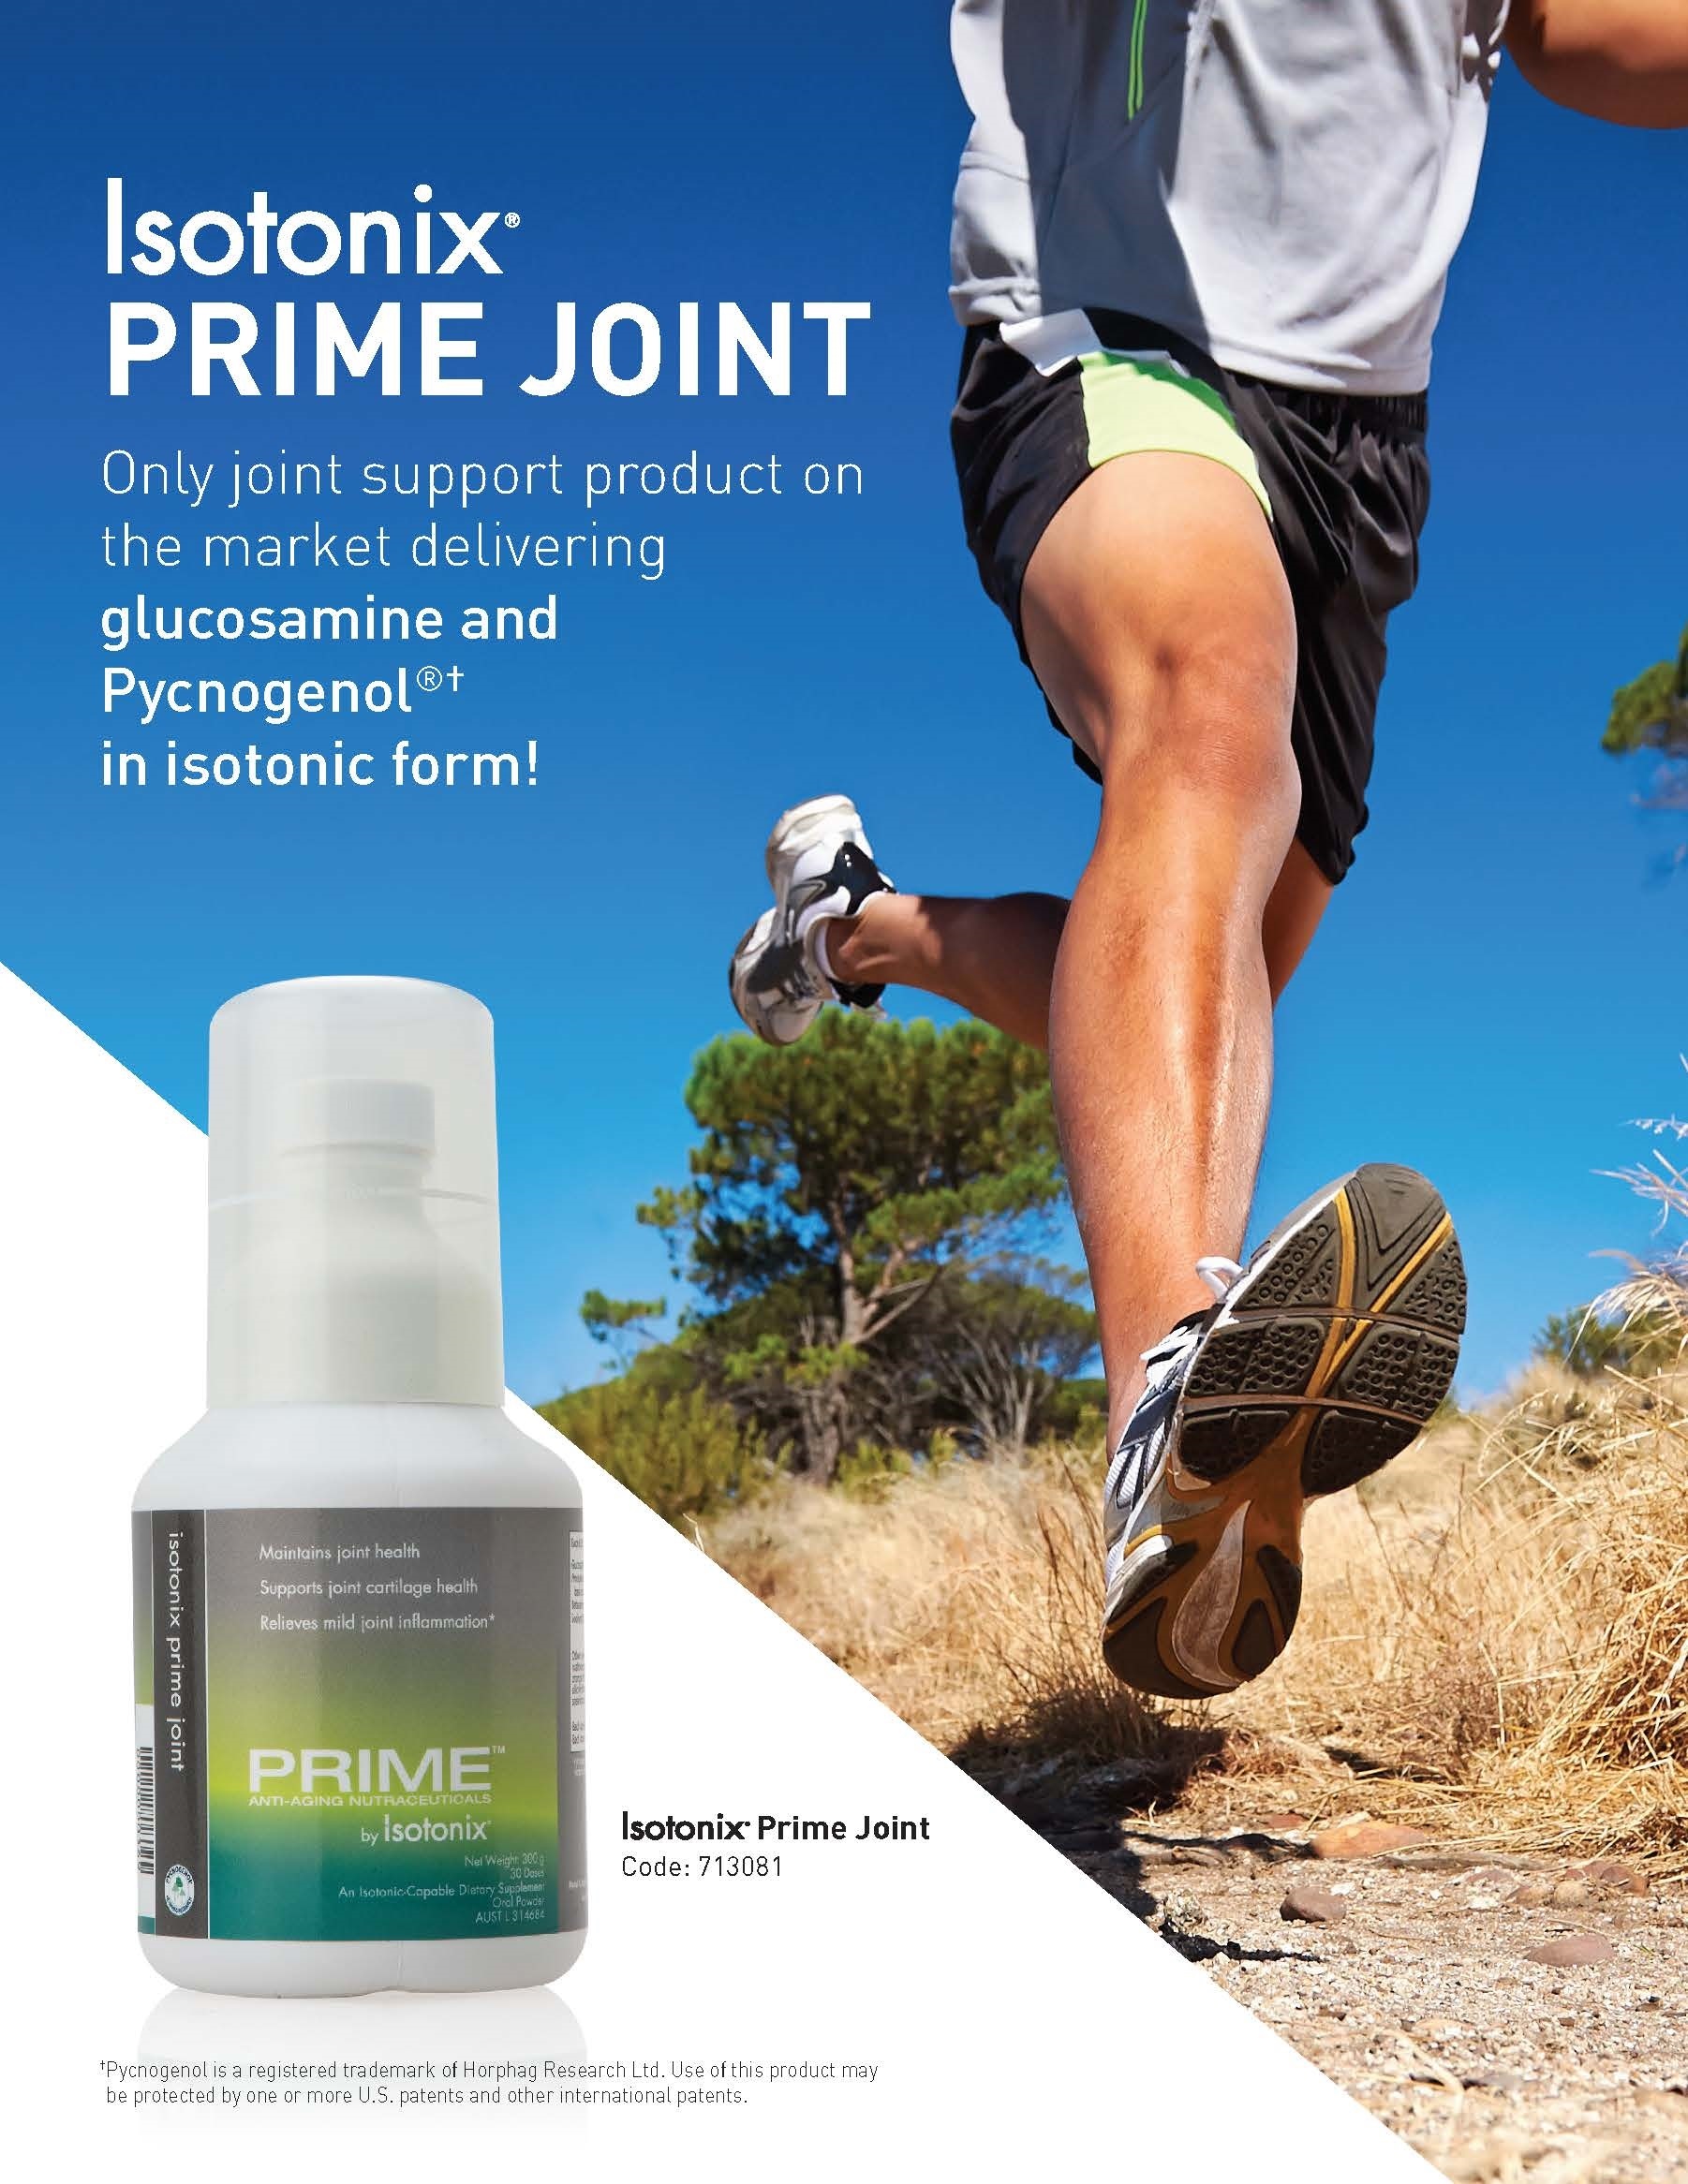 Why Choose Isotonix Prime Joint?